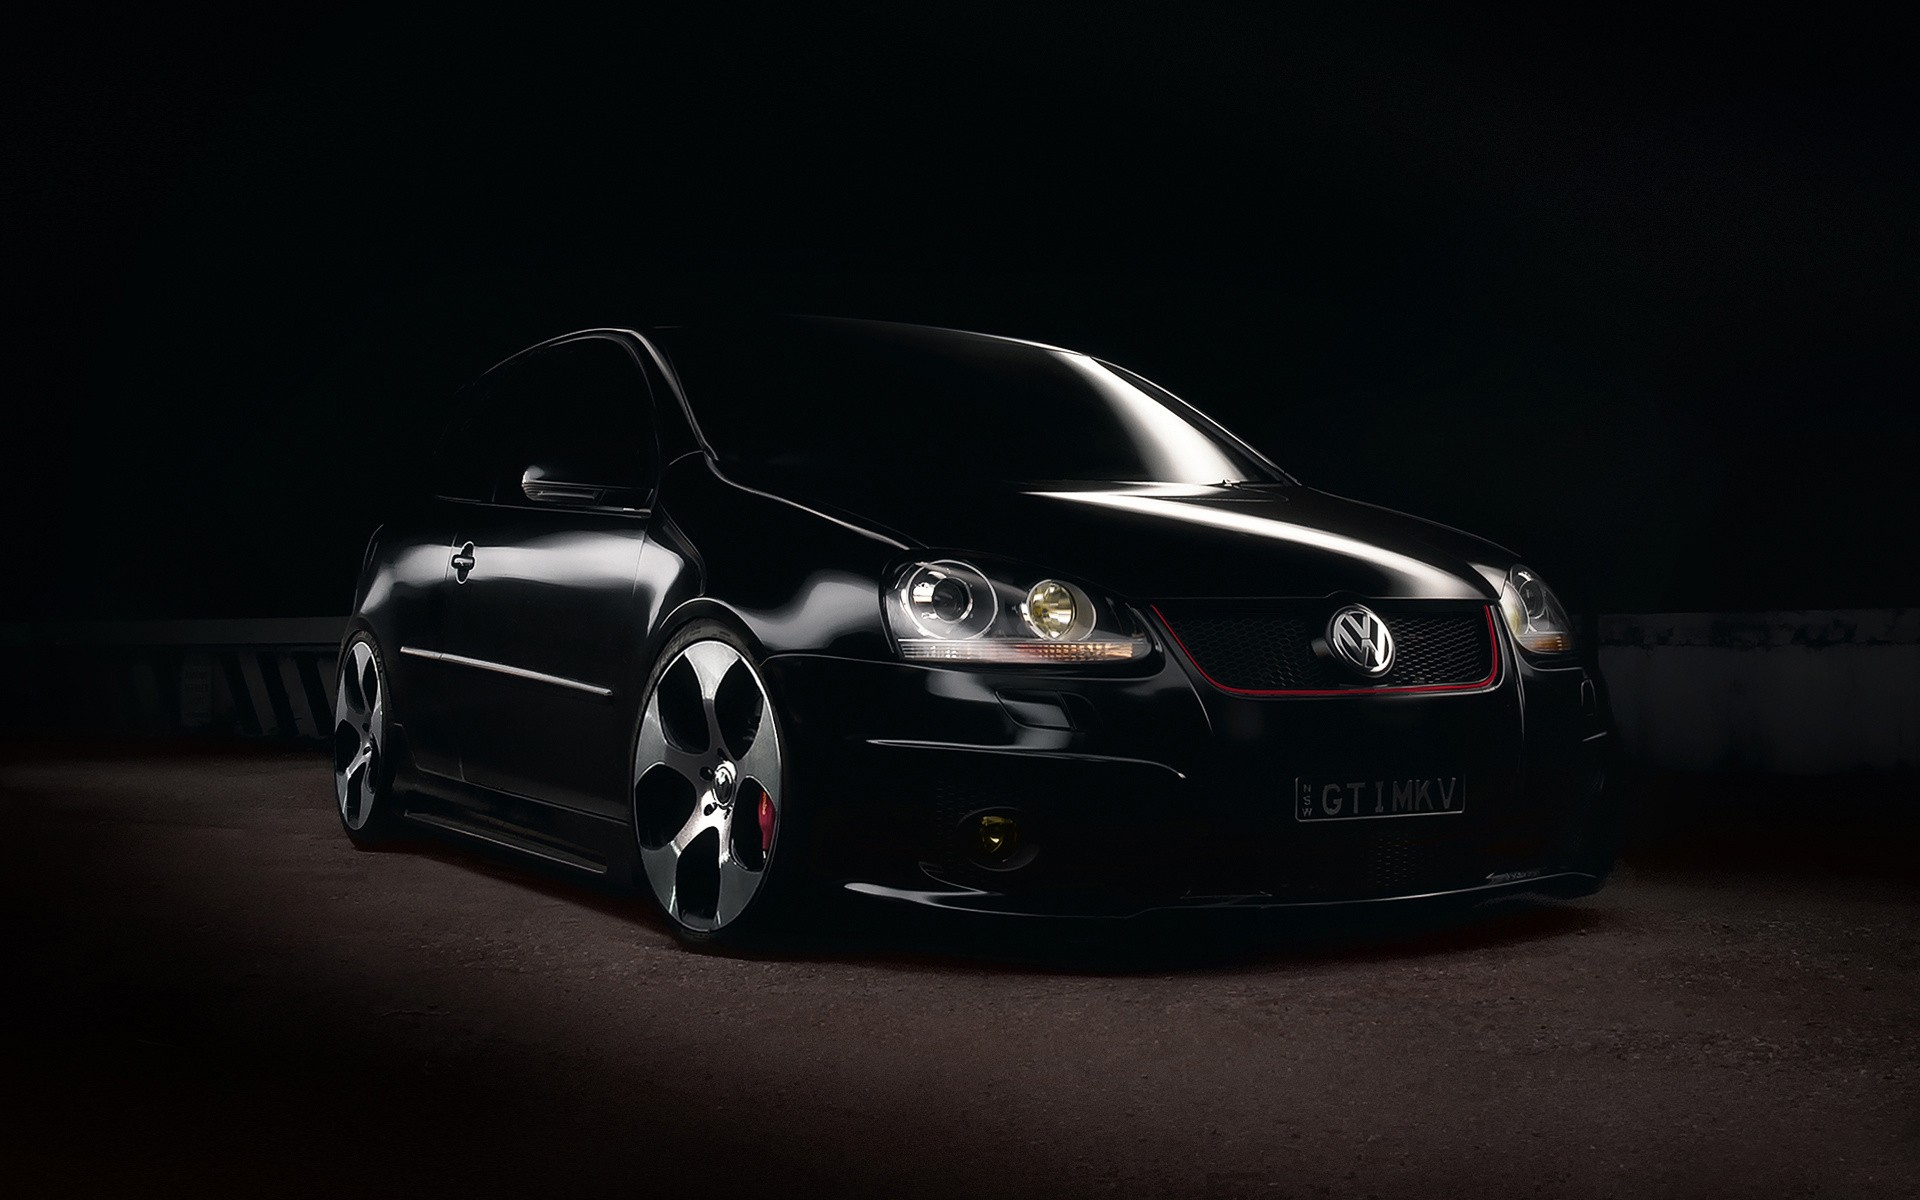 Free download Black and white cars volkswagen gti black cars